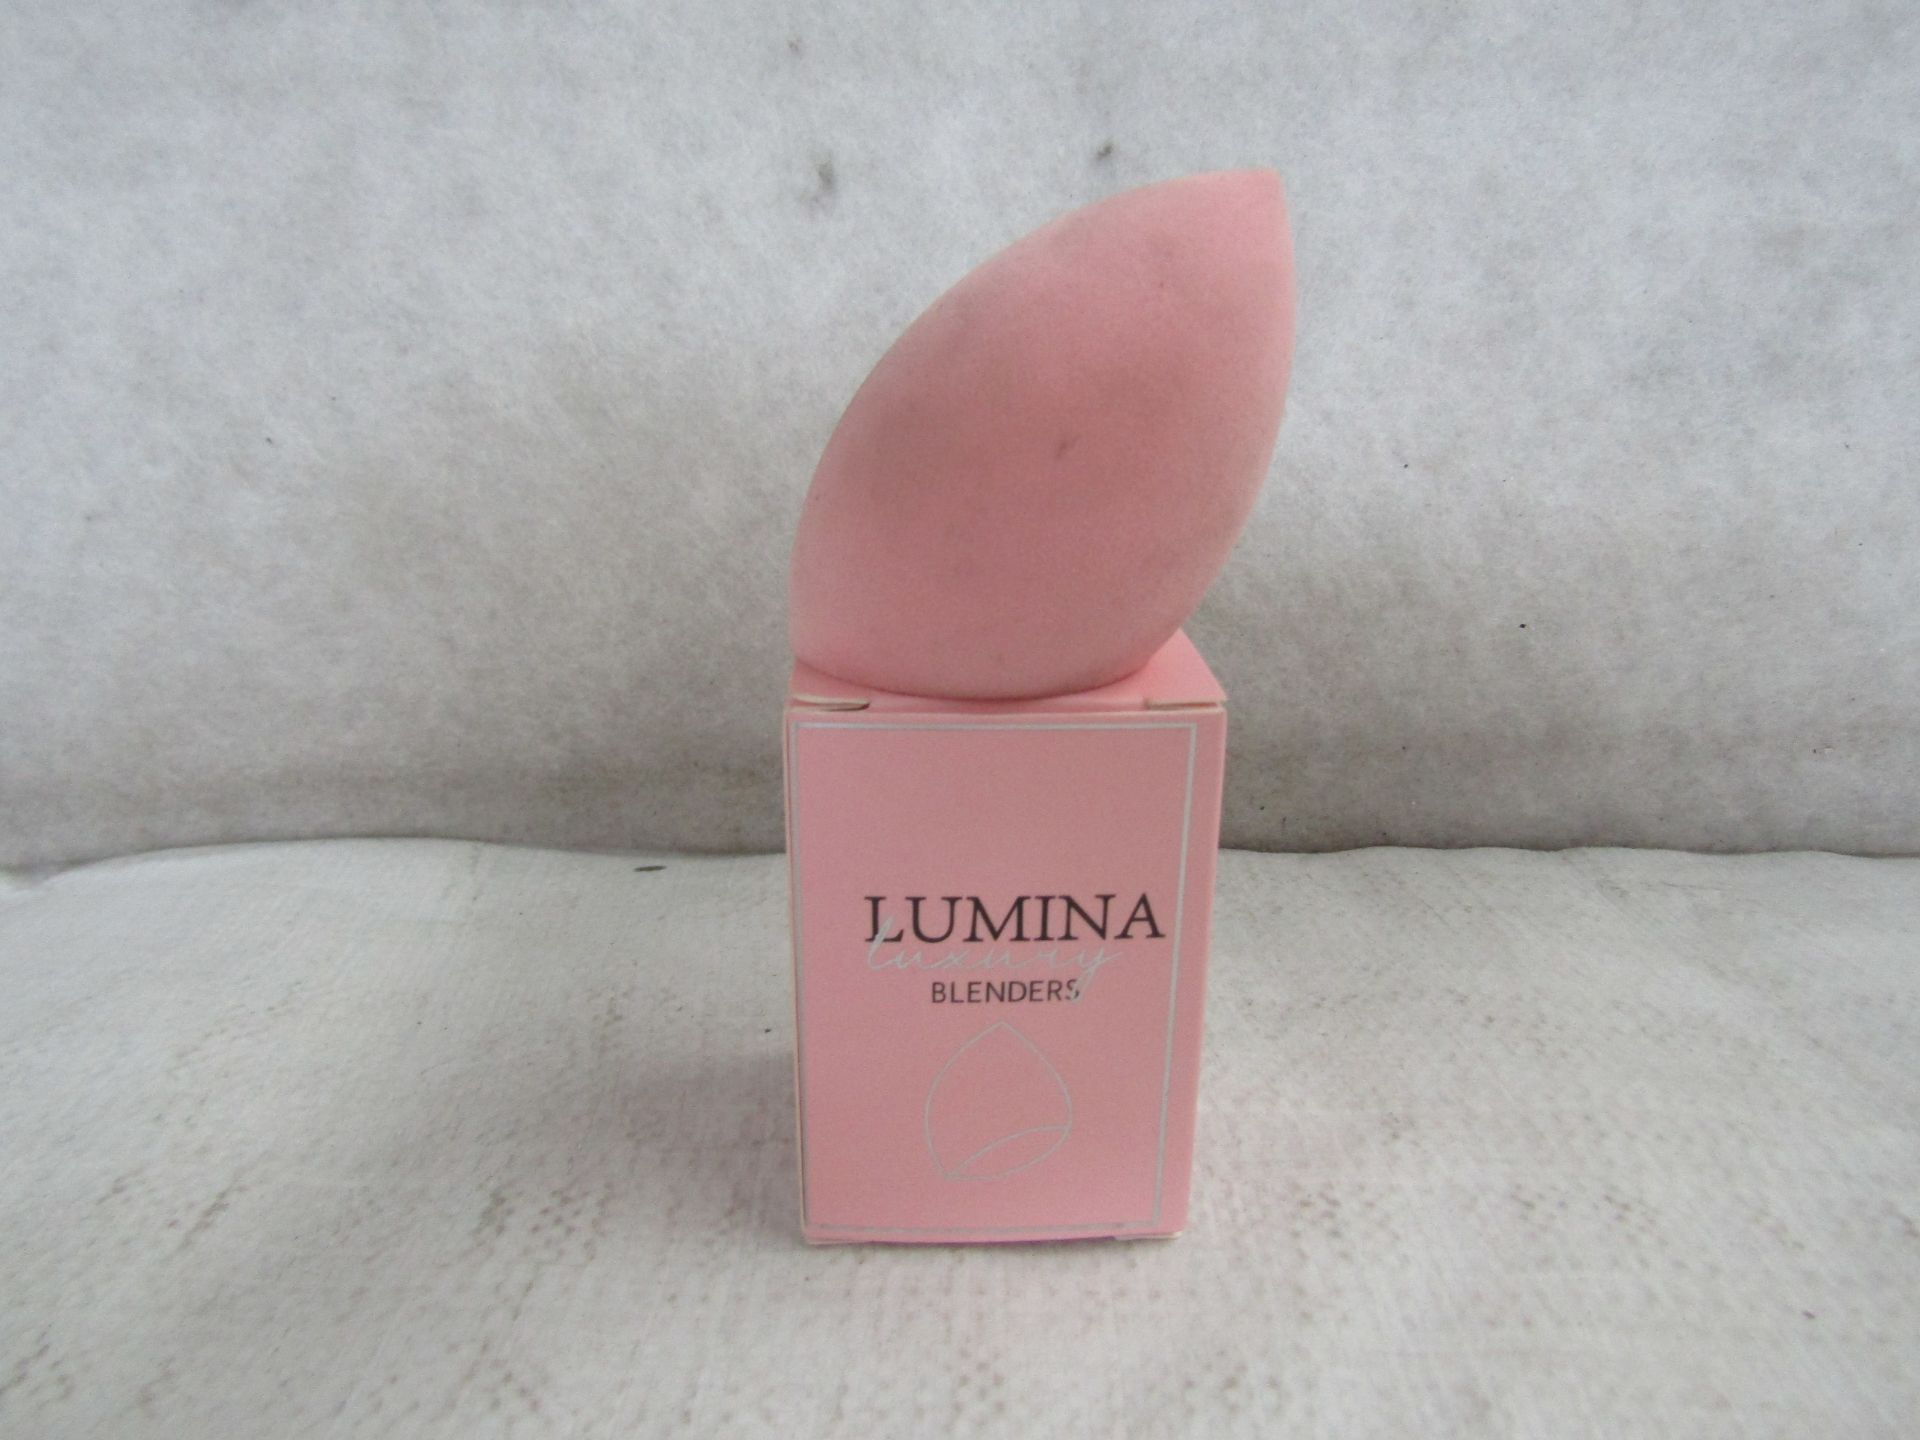 10x Lumina Luxury Blenders, new and boxed, RRP £4.99 each